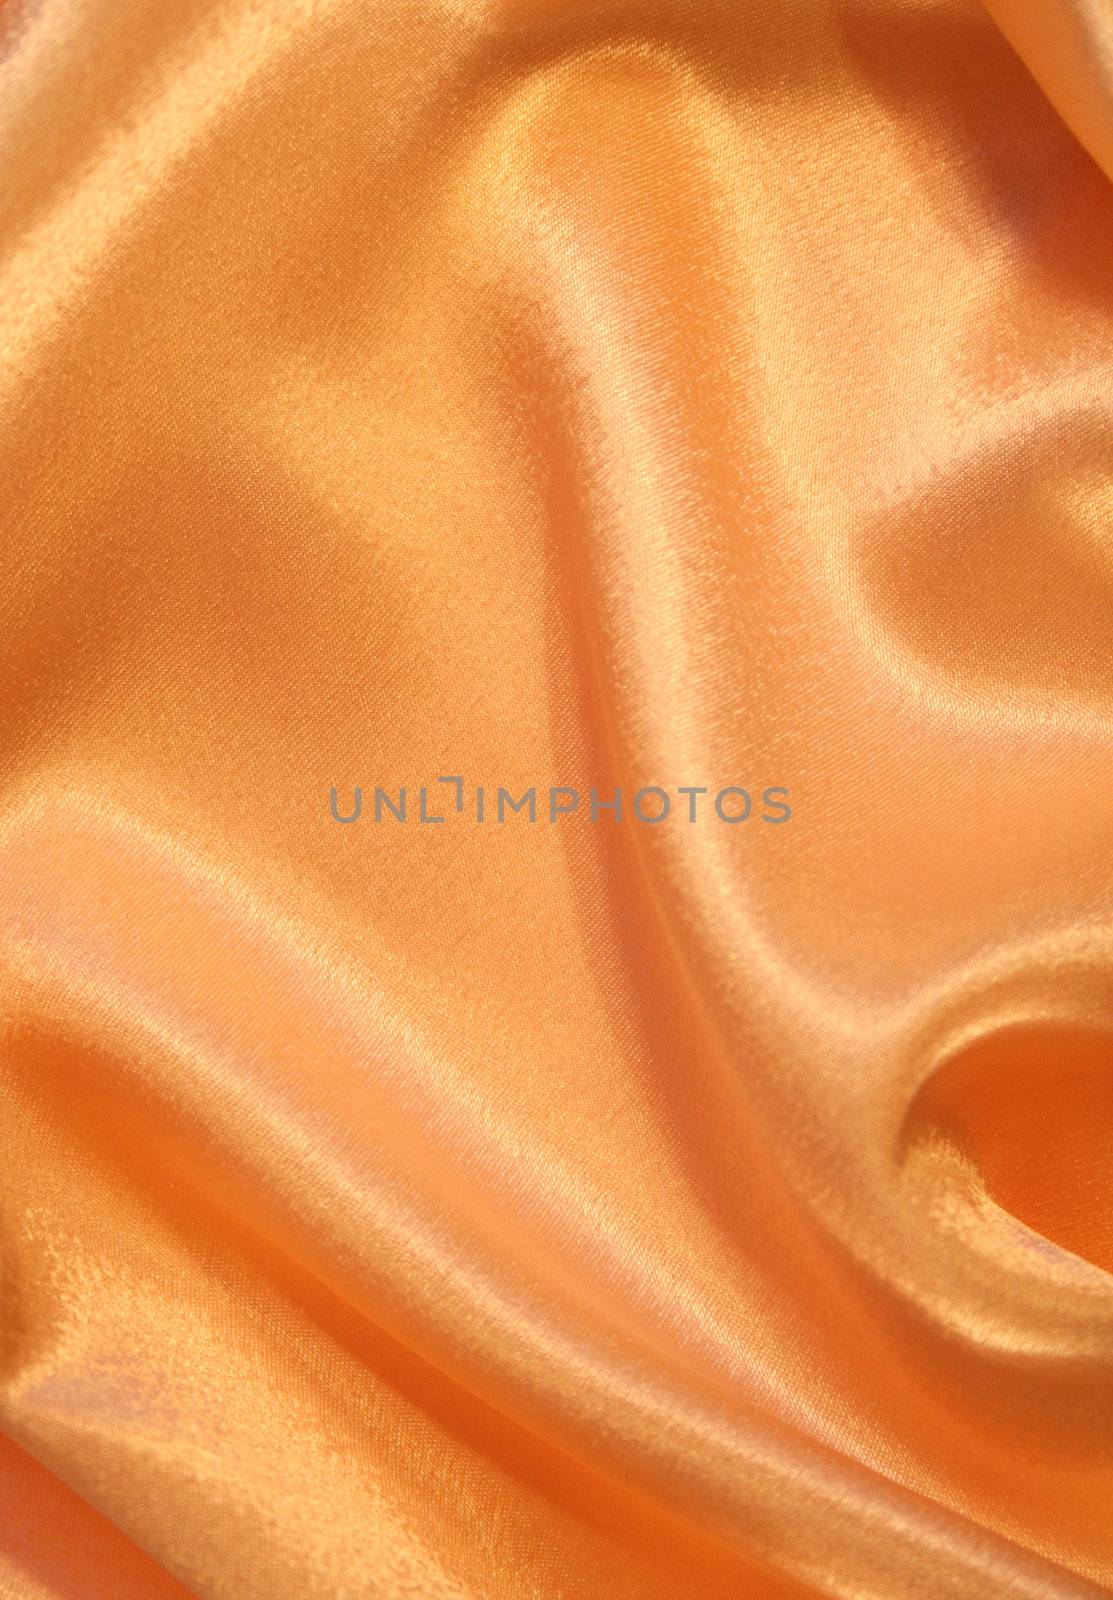 Smooth elegant golden silk can use as background